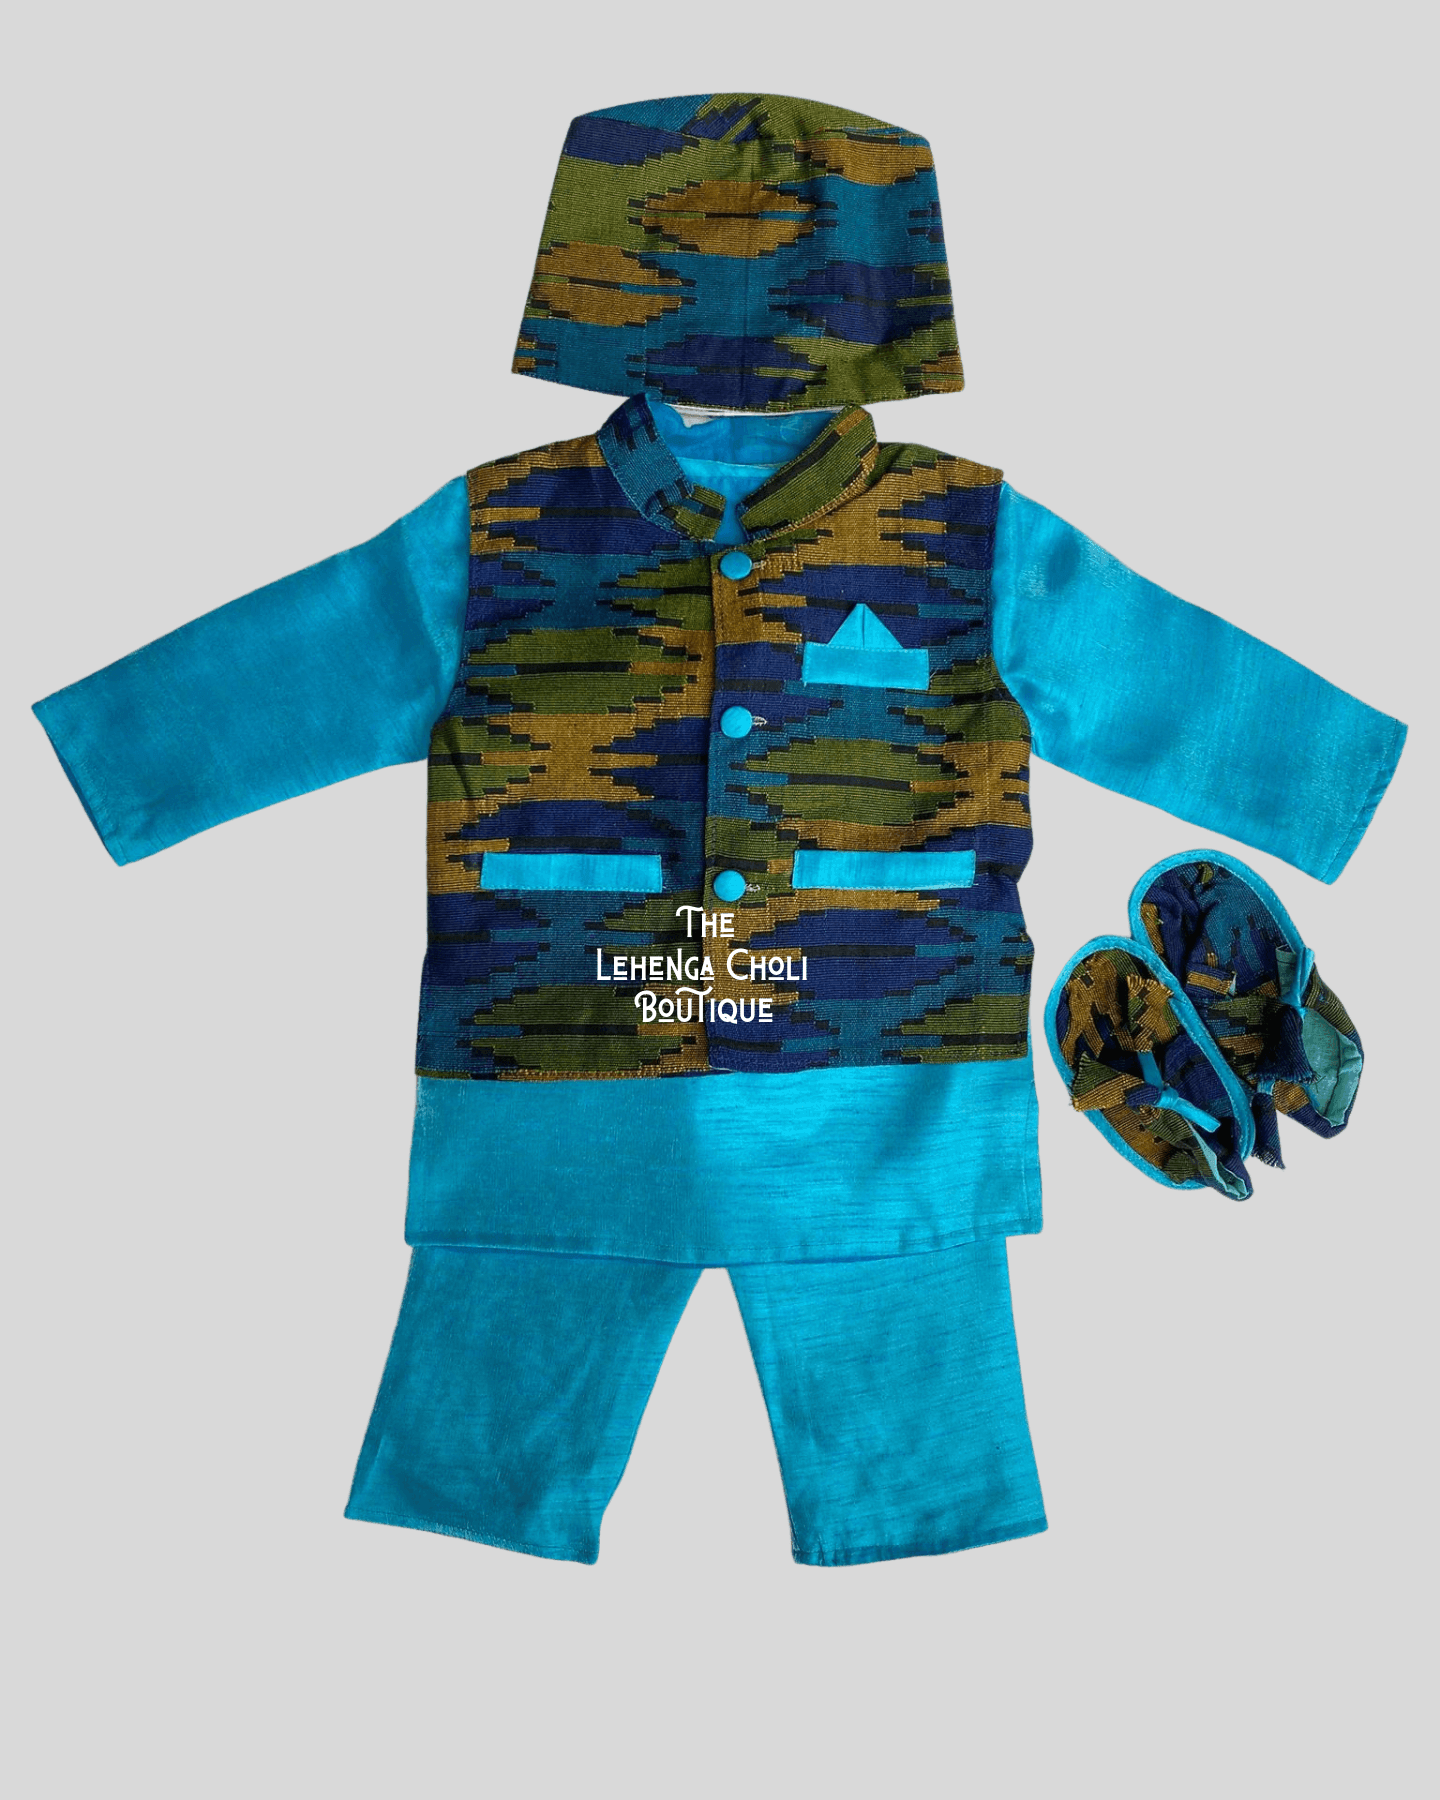 Nepali Dhak Pasni Dress For Baby Boy In SkyBlue | Nepali Baby Weaning Set in SkyBlue Color - Boutique Nepal Au